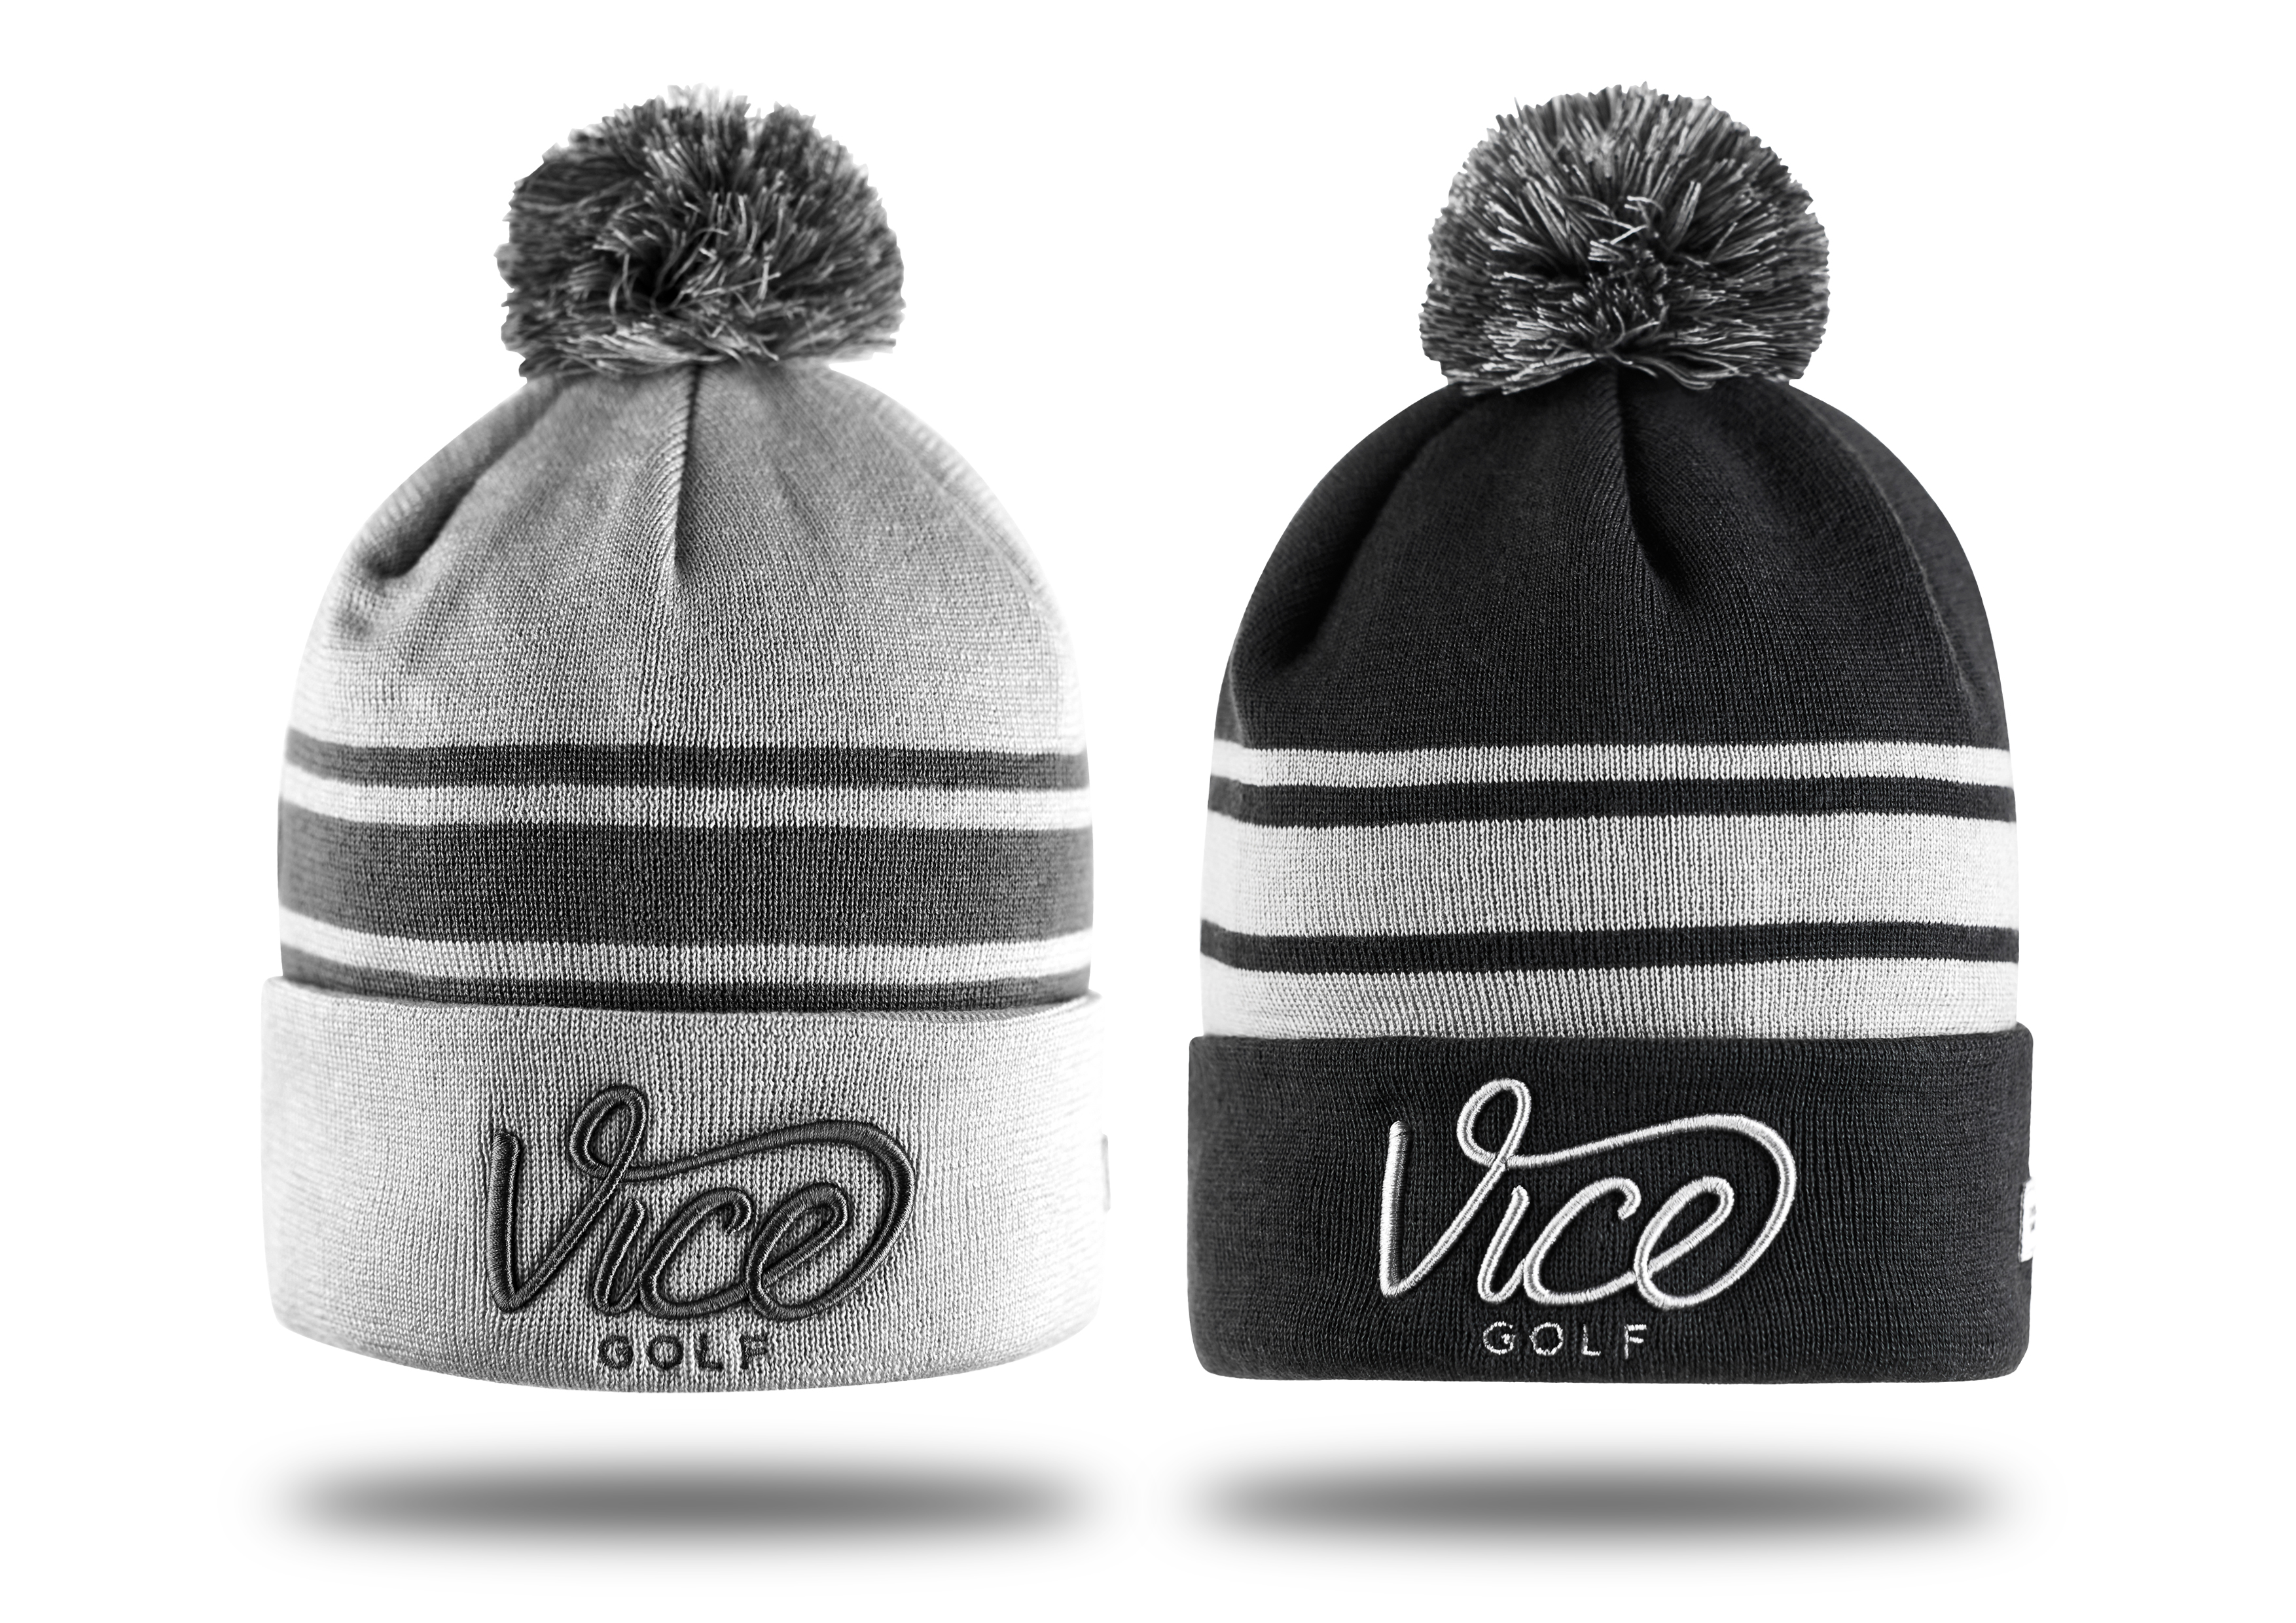 VICE Golf launches awesome Winter Beanies